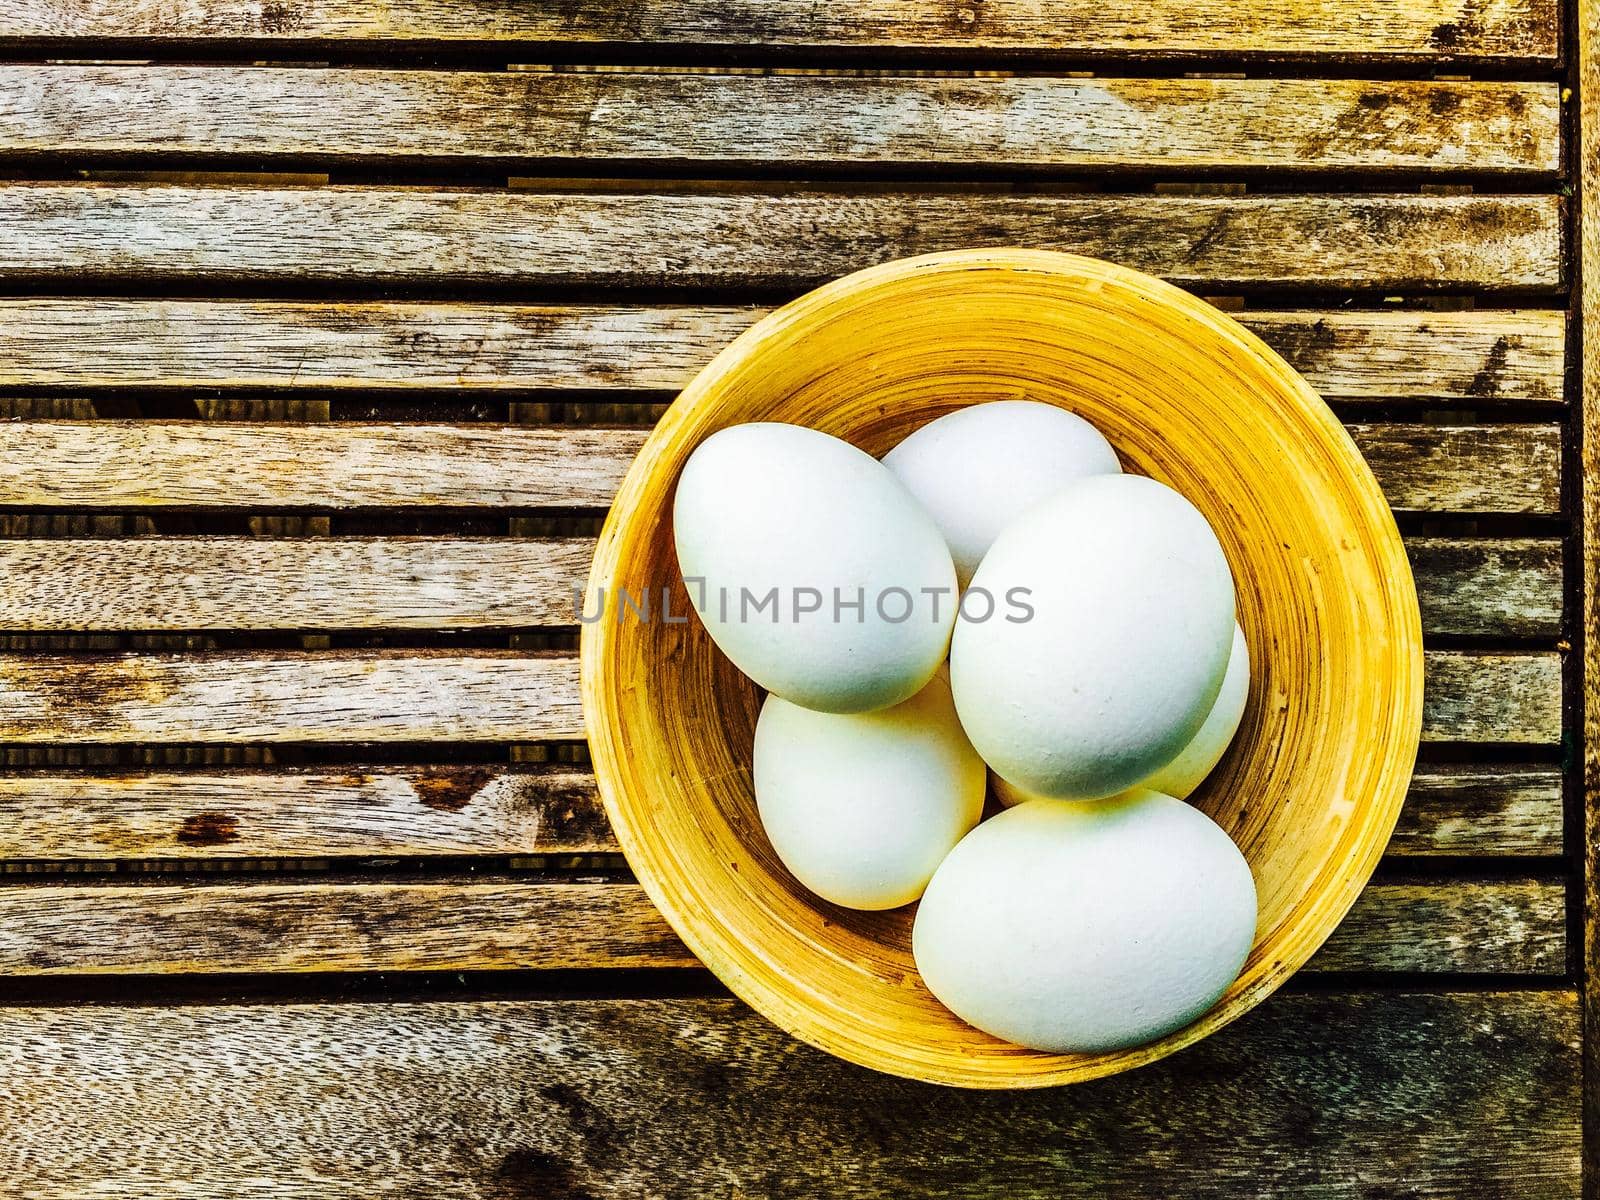 Chicken Eggs in a Bowl by Weltblick